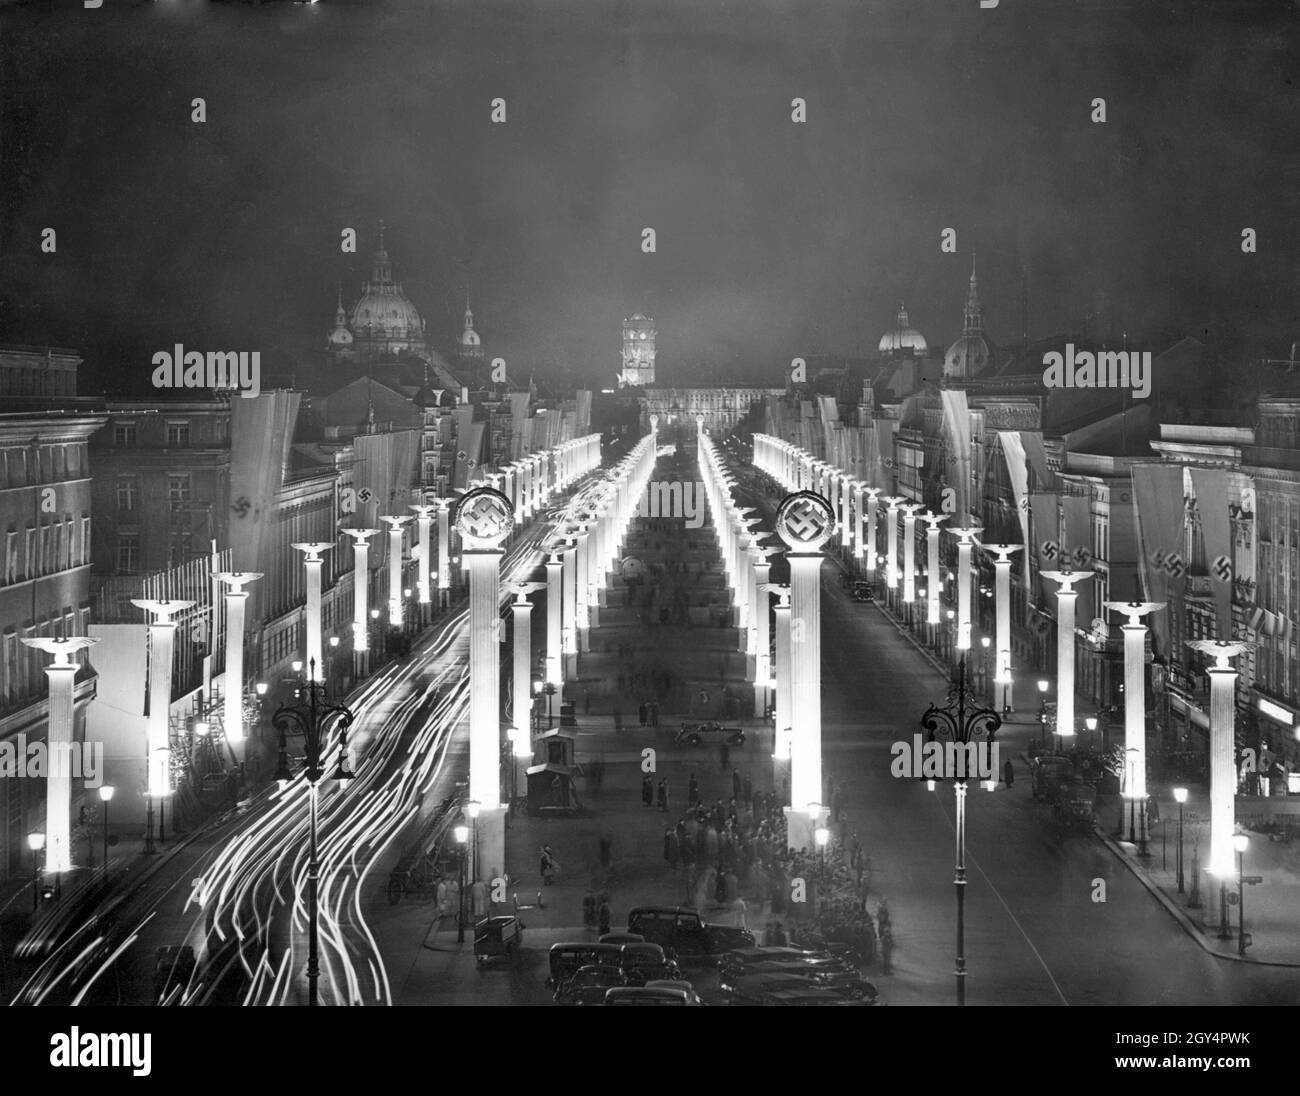 View from the Brandenburg Gate onto the street Unter den Linden decorated with swastikas, Reich eagles and swastika flags on April 19, 1939, the evening before Adolf Hitler's 50th birthday. In the background on the left you can see the Berlin Cathedral, on the right the. Tower of the Red City Hall and next to it the dome of the Berlin Palace. [automated translation] Stock Photo